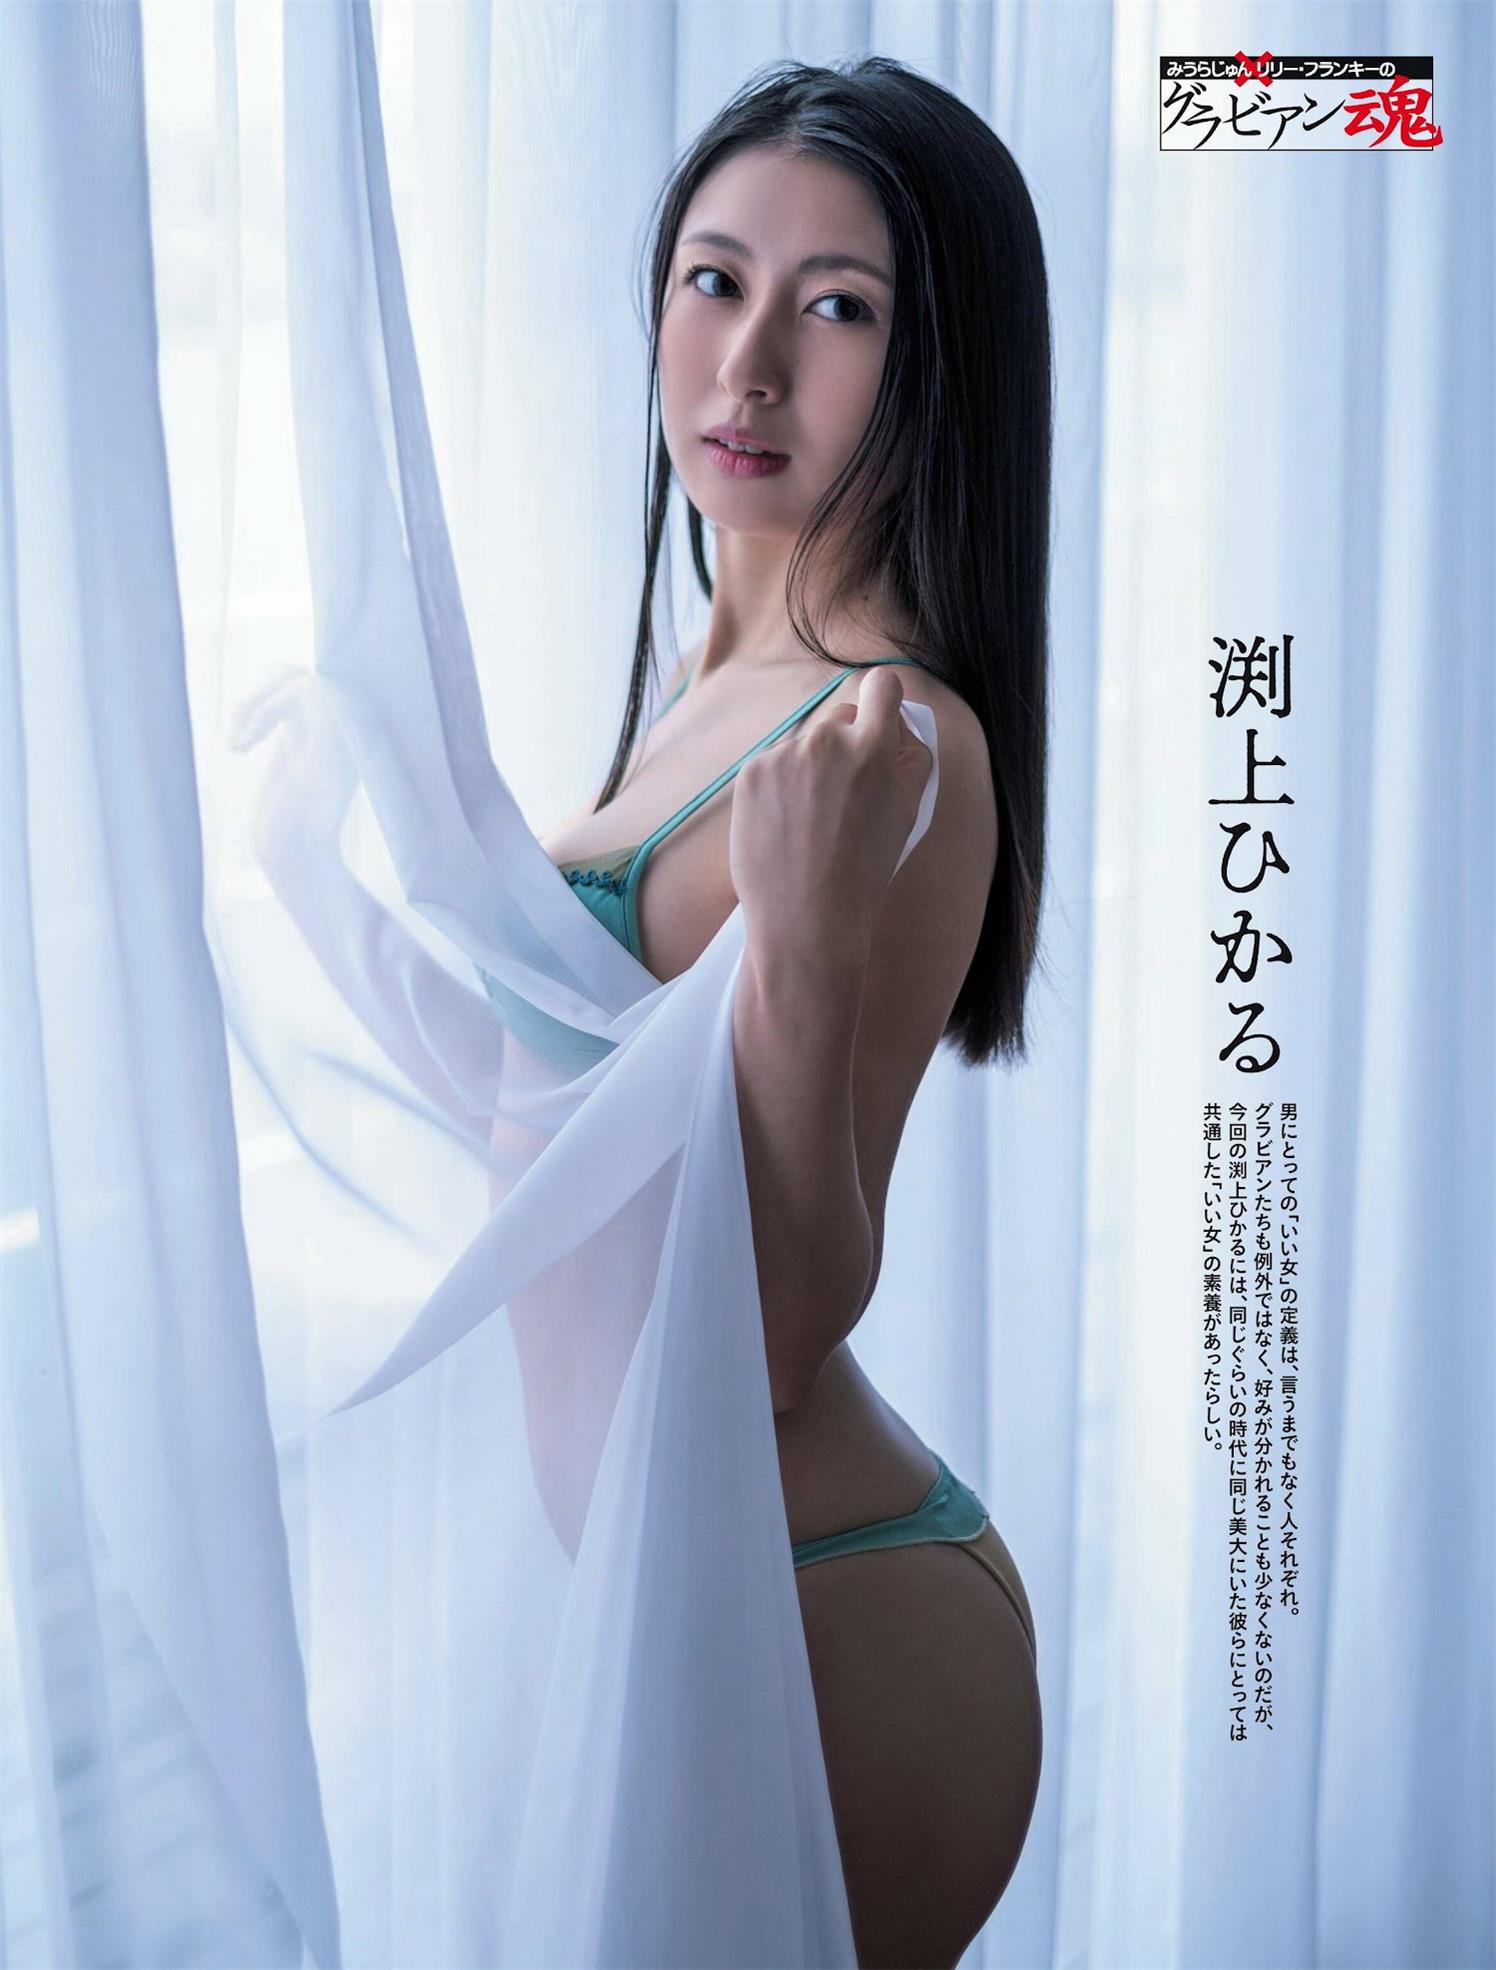 [Weekly SPA!] 2023.04.04 影山優佳 渕上ひかる-米图网